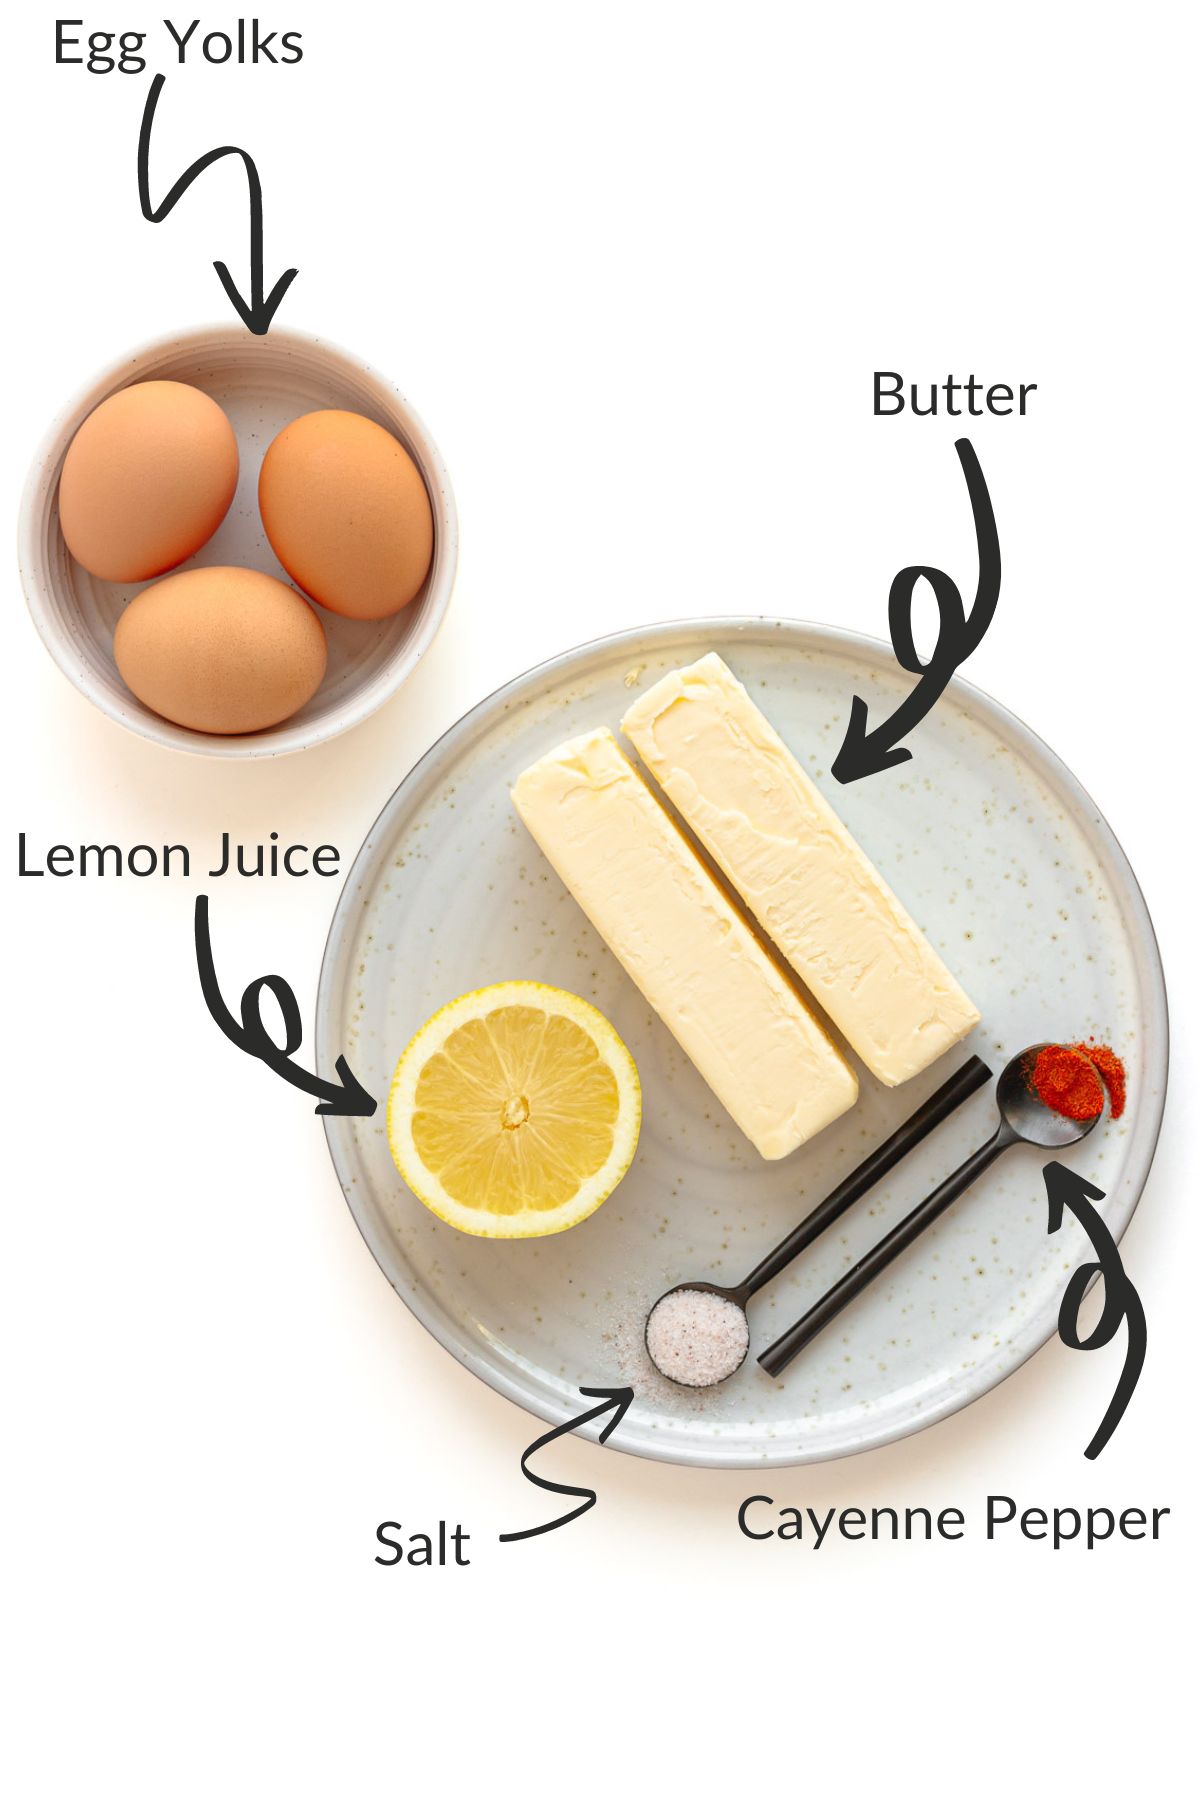 Labelled photo of ingredients needed to make hollandaise sauce.